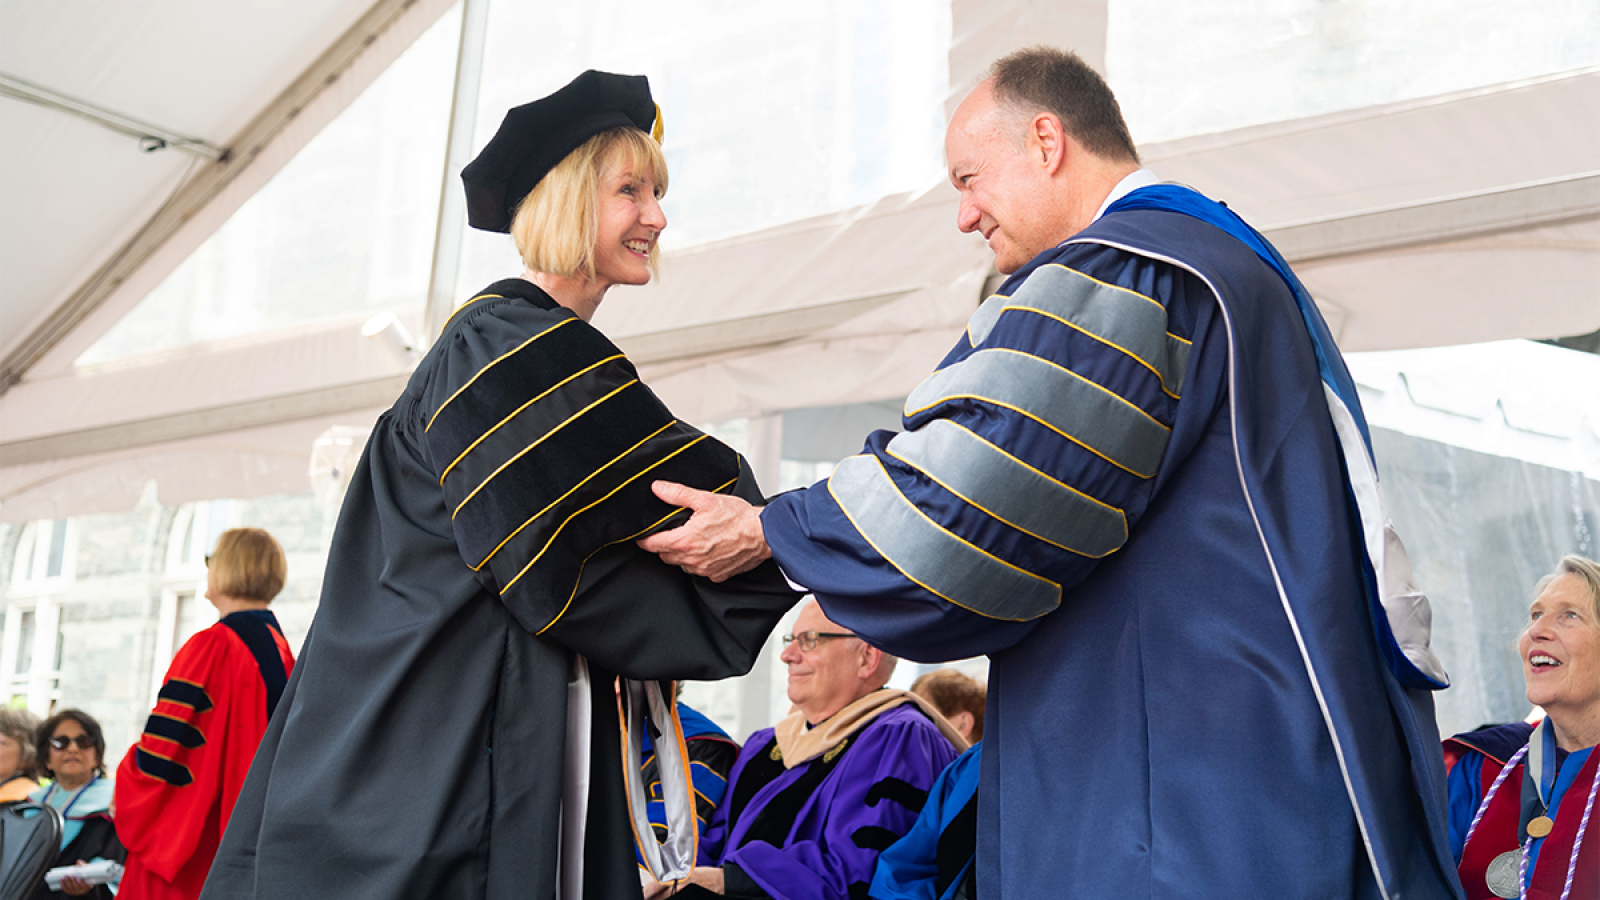 A graduate of a Ph.D. program wearing a cap and gown shakes the hand of Georgetown University President John J. DeGioia at a commencement event in 2022.